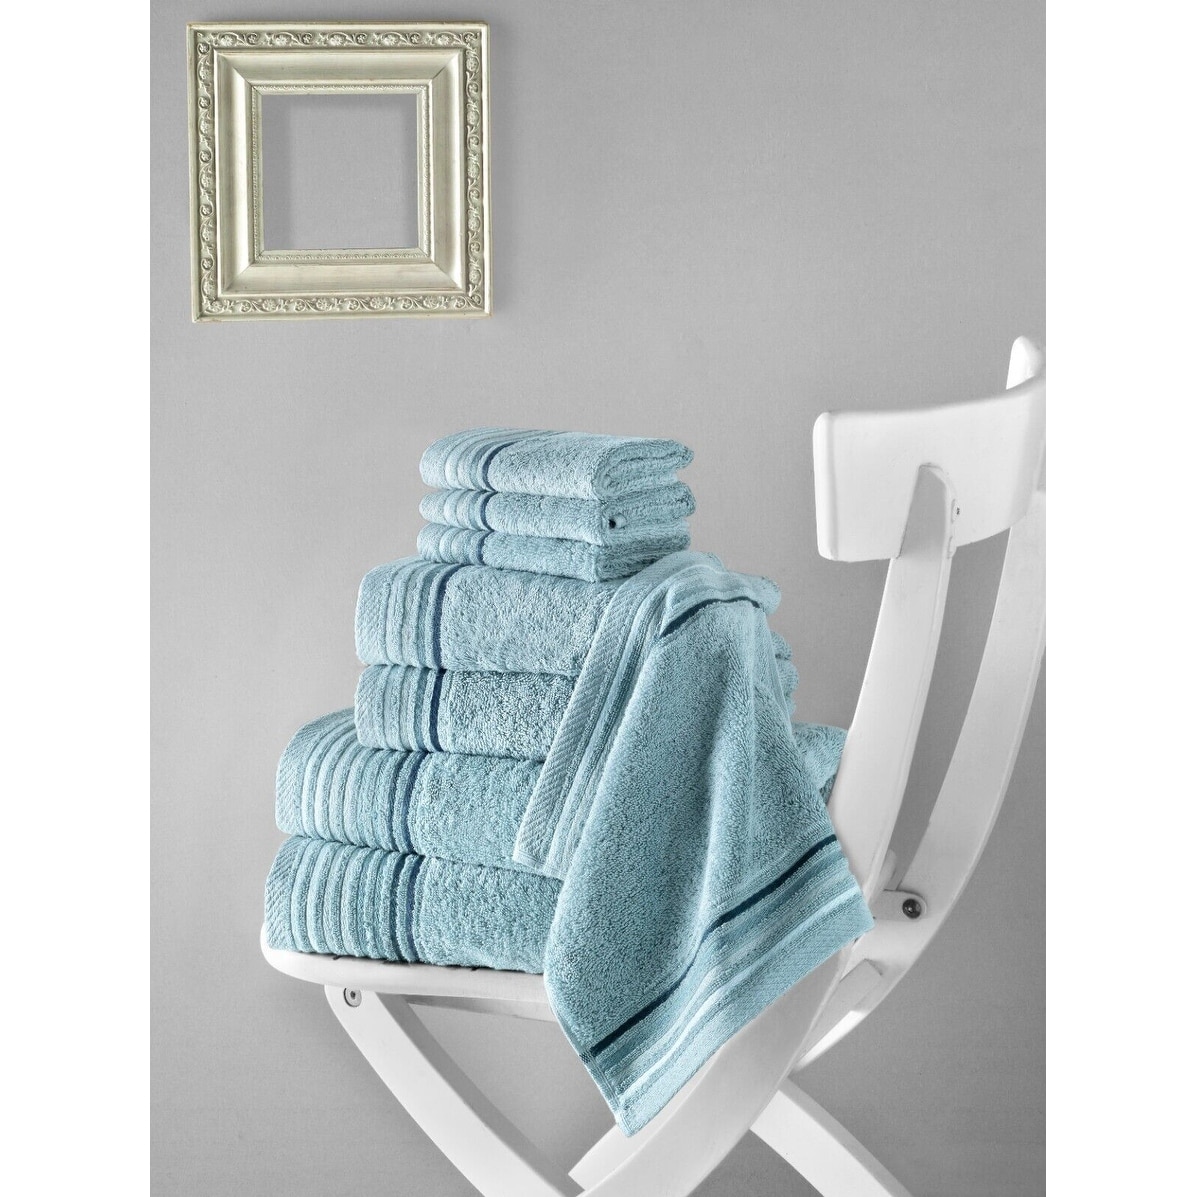 https://ak1.ostkcdn.com/images/products/is/images/direct/fa3e745aade4a58681690fbea9c7de06406eaf61/Royal-Turkish-Towels-Turkish-Cotton-Bamboo-Bathroom-Towel---Heavy-Duty-Soft-and-Luxurious-Towel-Set-%28Set-of-8%29.jpg